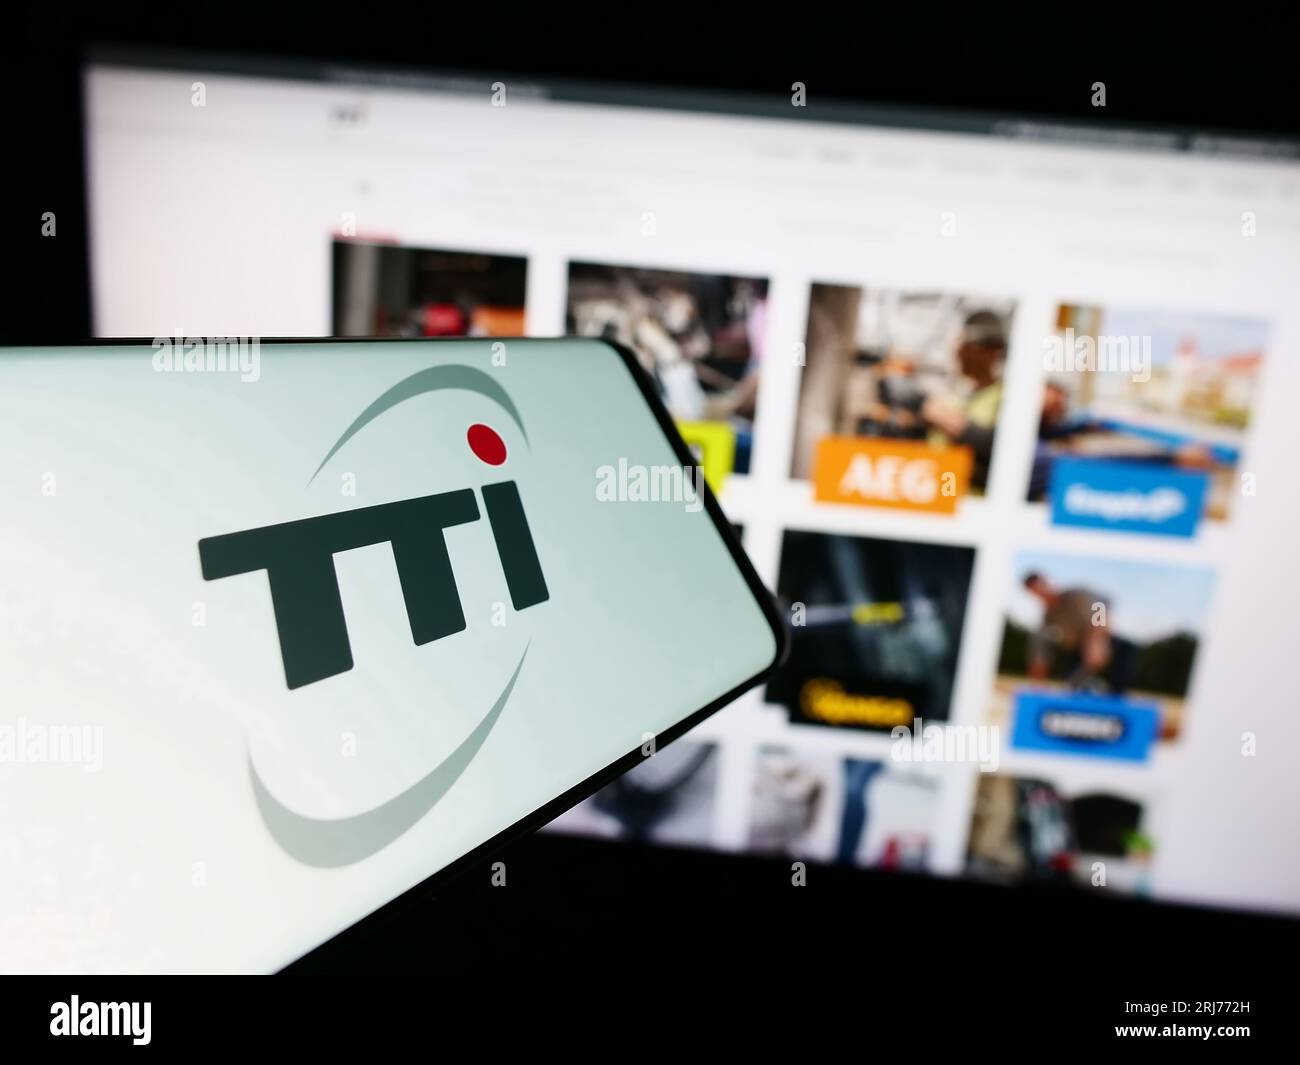 Smartphone with logo of Techtronic Industries Company Limited (TTI) on screen in front of website. Focus on center-right of phone display. Stock Photo